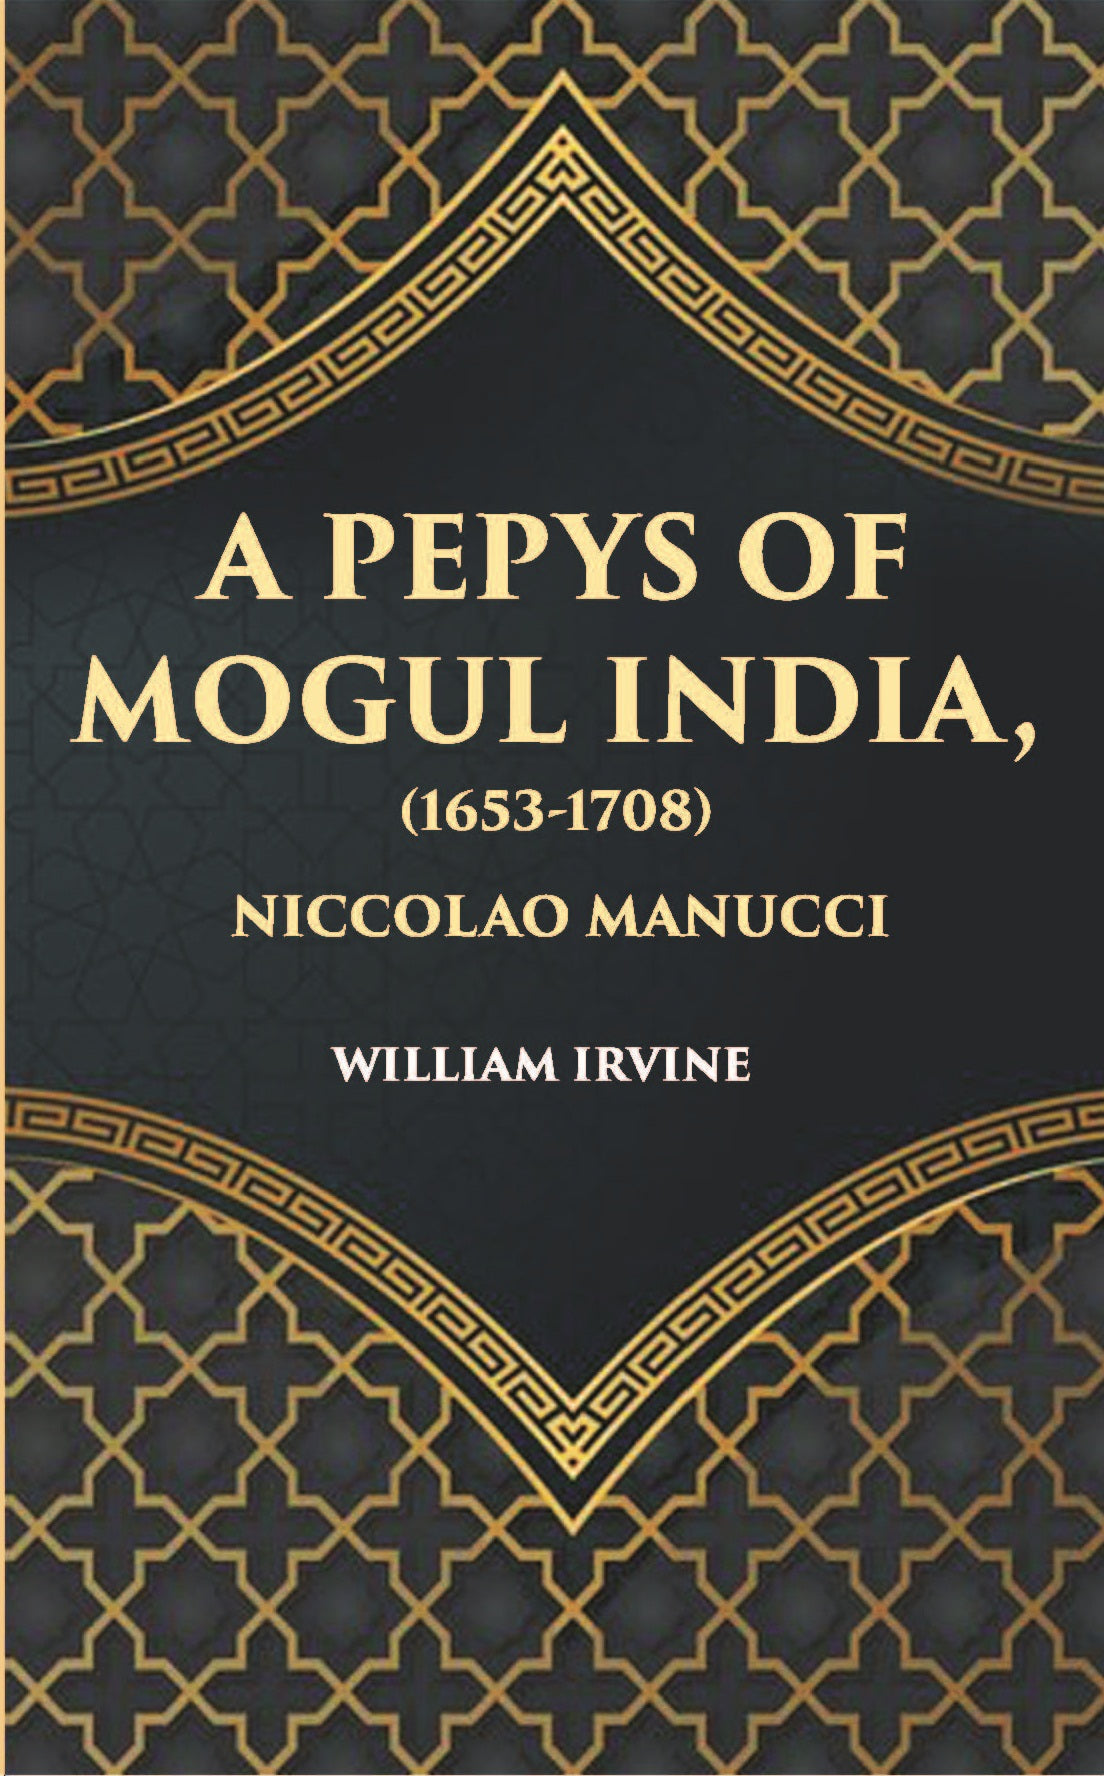 A Pepys Of Mogul India1653-1708: Being An Abridged Edition Of The Storia Do Mogor Of Niccolao Manucci